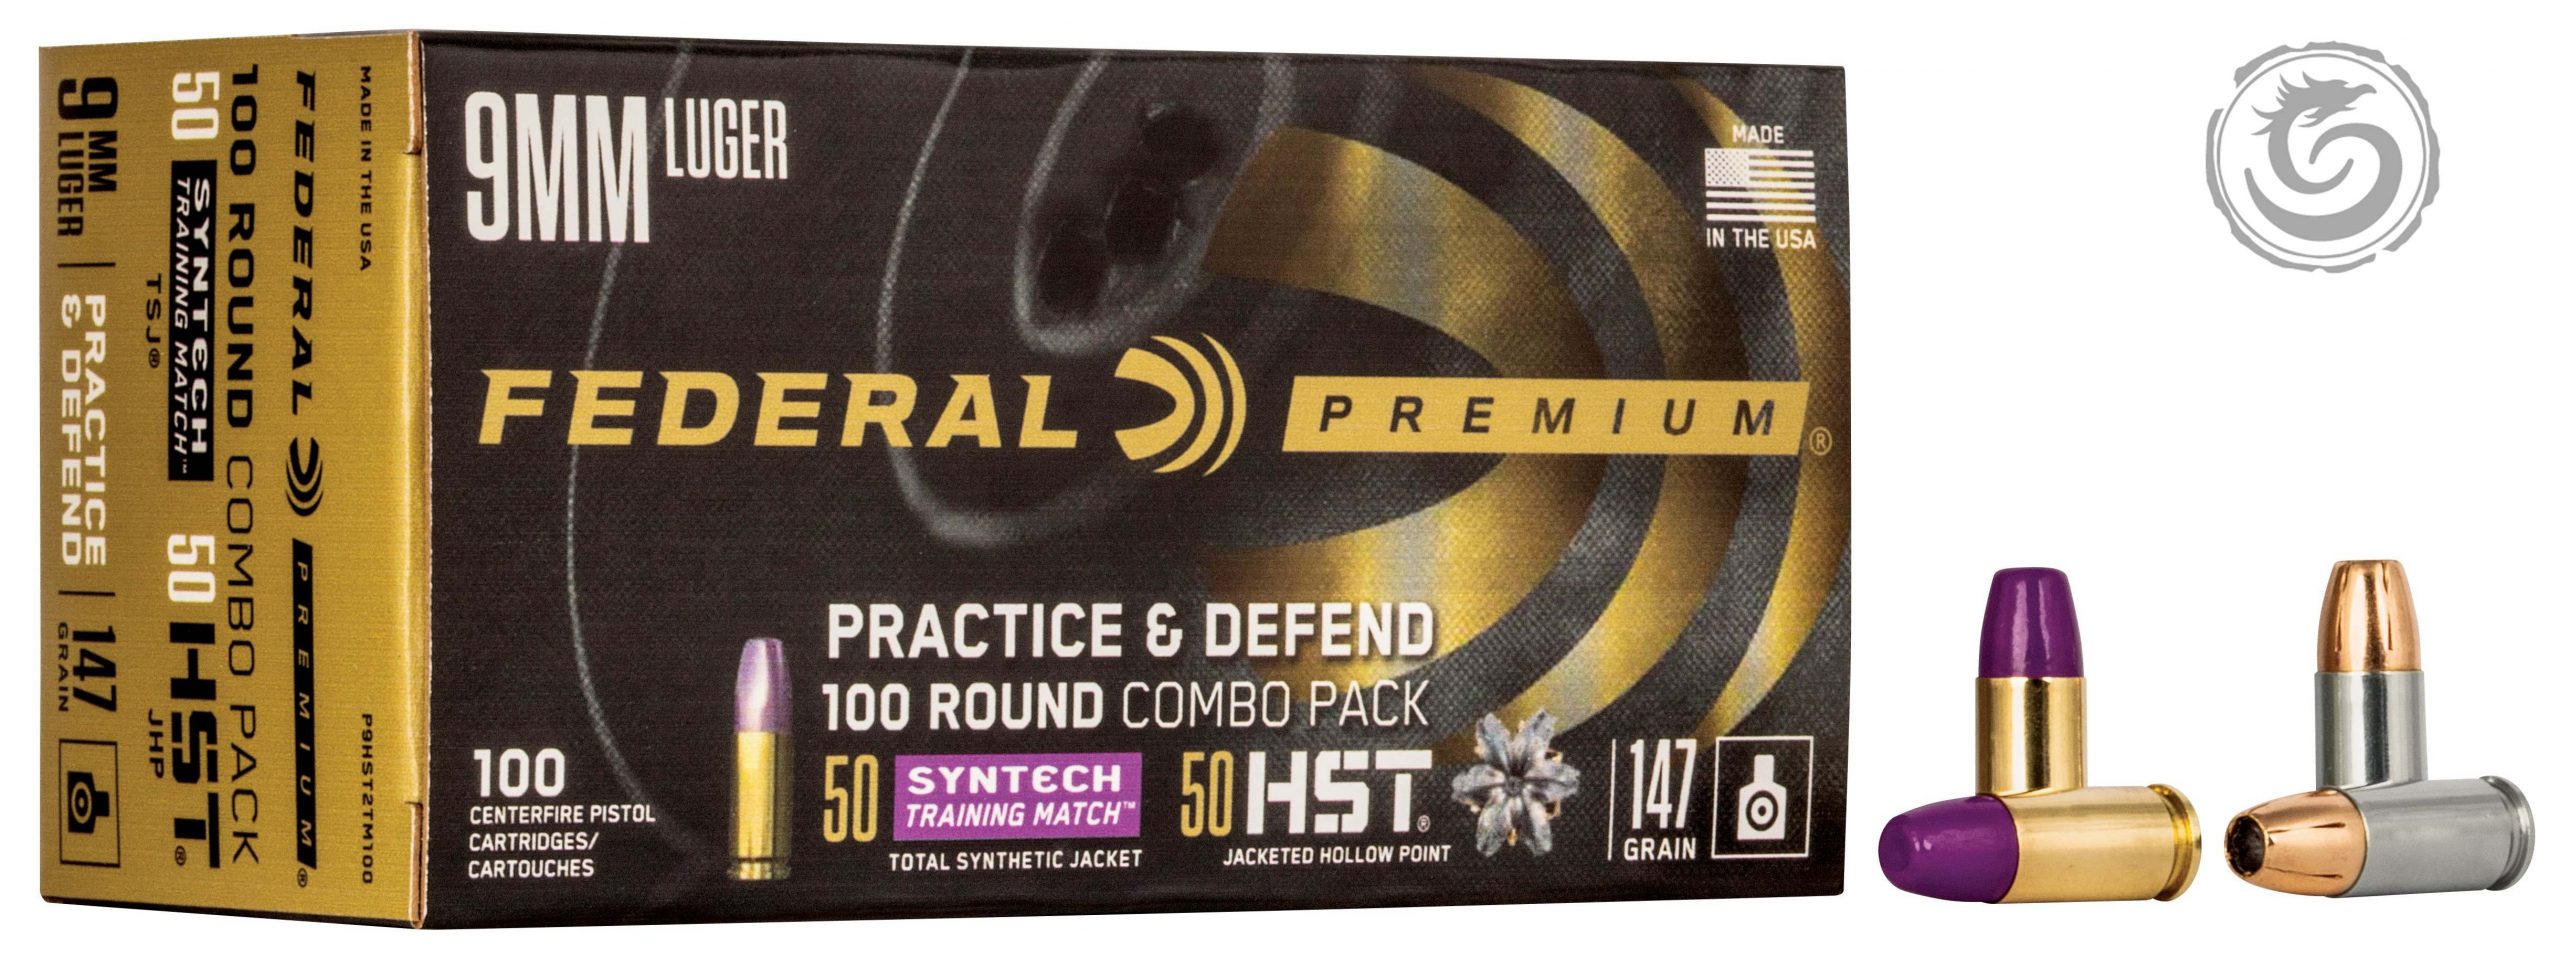 Federal Practice & Defend 9mm 147 gr HST/Synthetic Box of 100 » Tenda ...